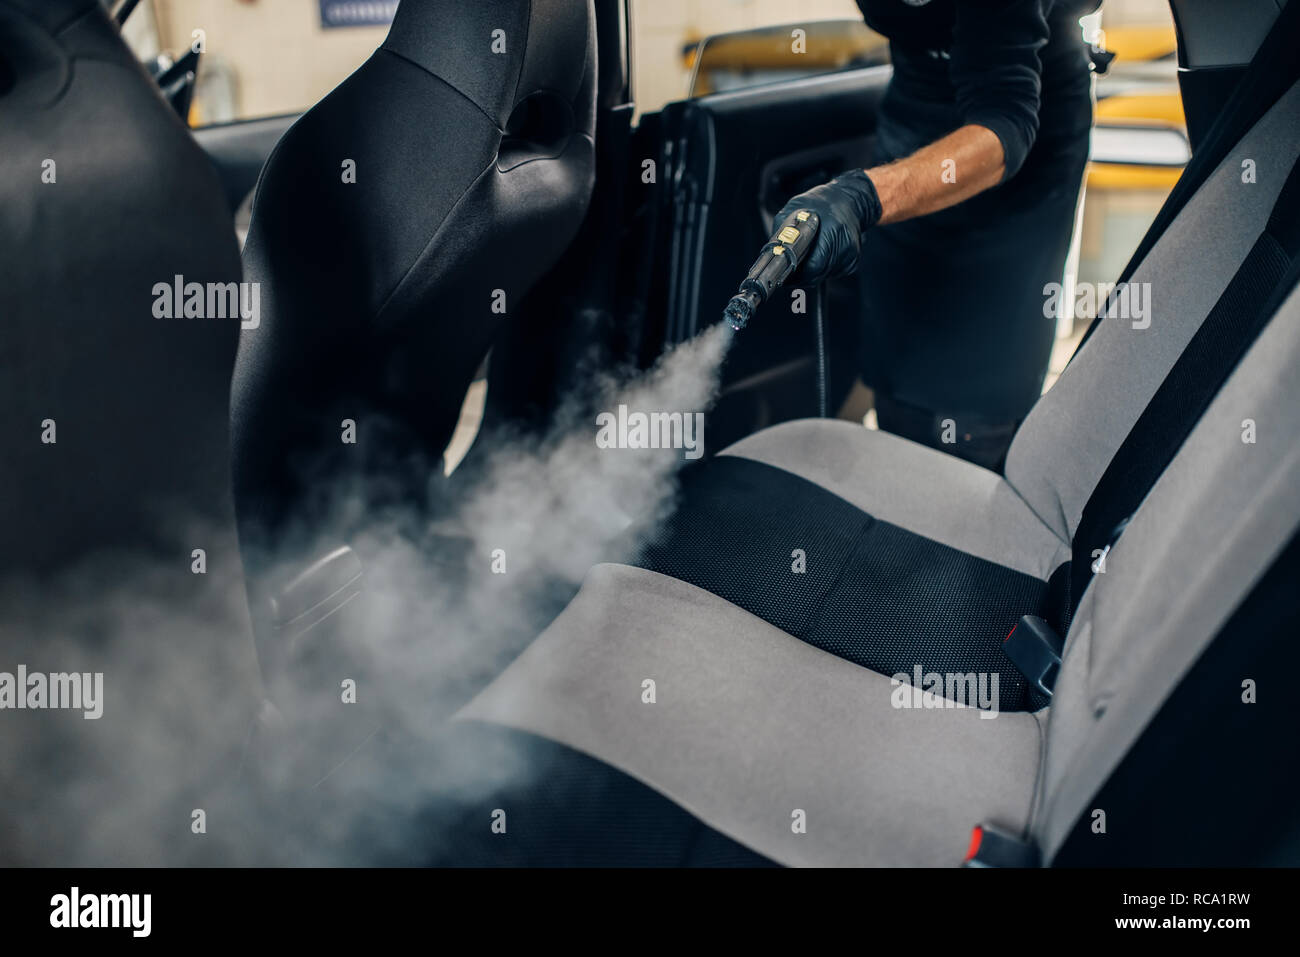 Carwash Service Male Worker In Gloves Cleans Seats With